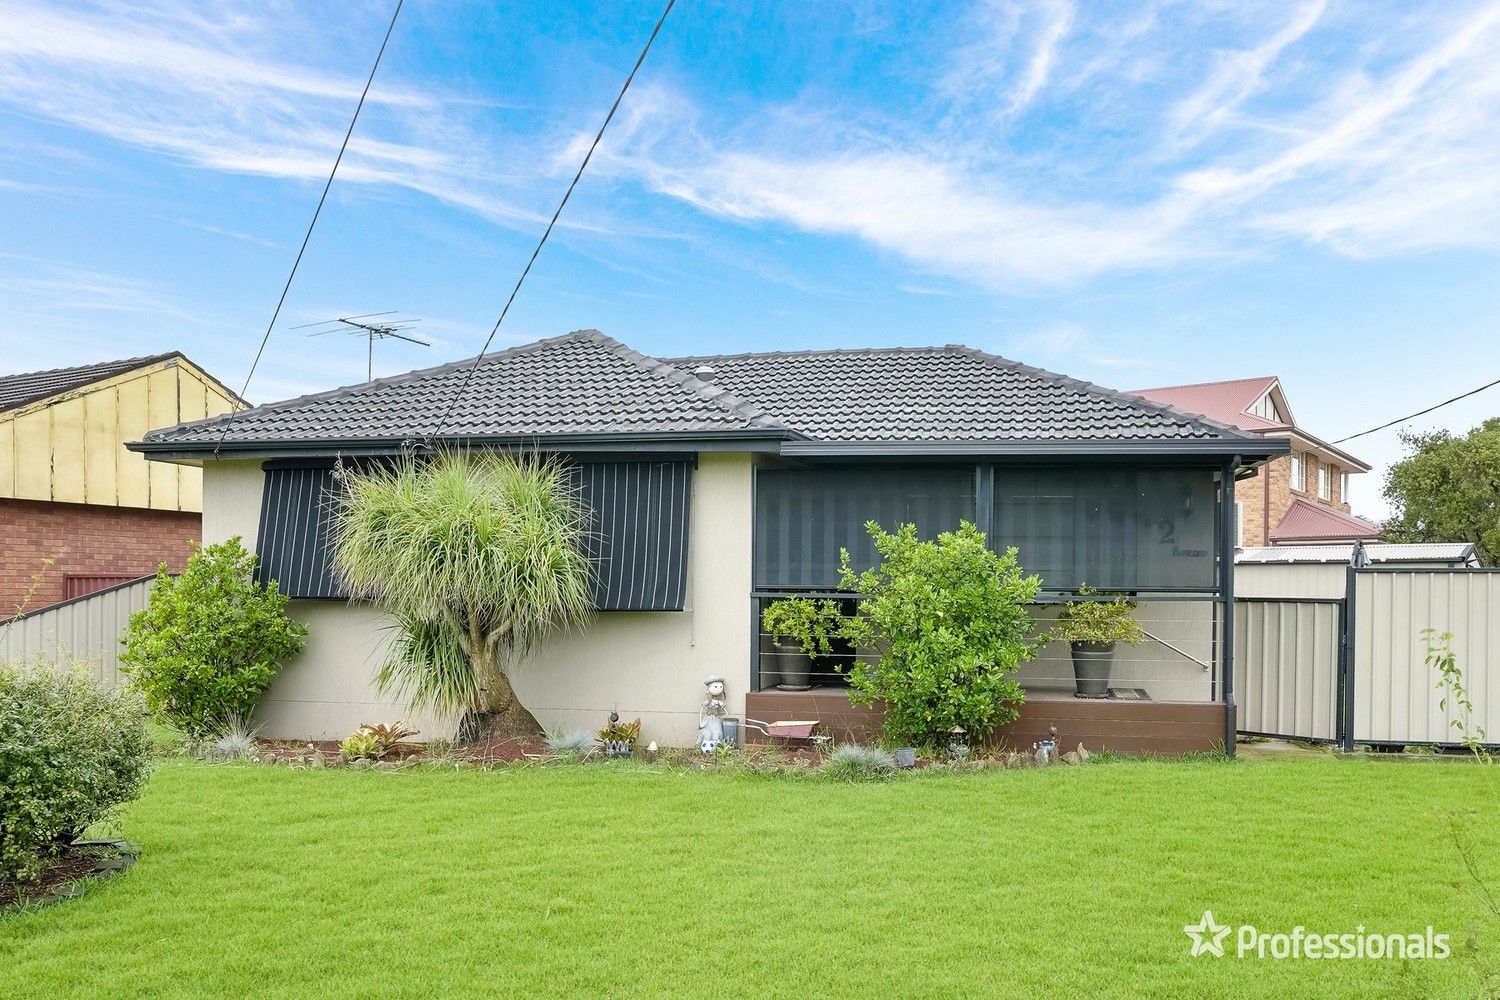 4 bedrooms House in 2 Burford Street COLYTON NSW, 2760